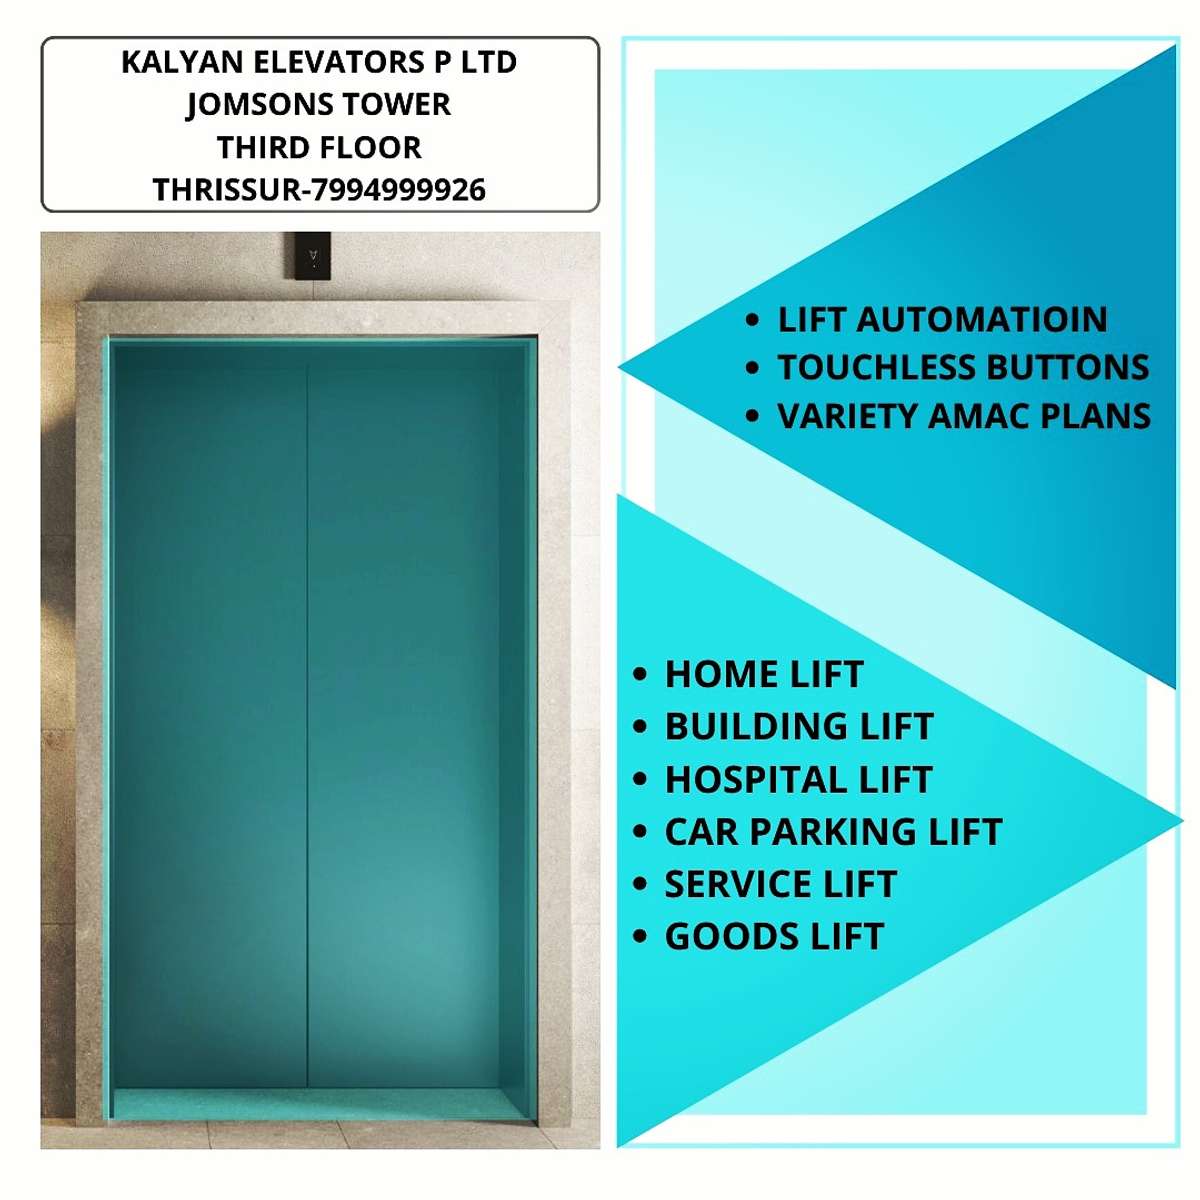 Kalyan home Elevators offers the long-awaited solution to vertical mobility within homes at affordable prices and easy-to-use features. Our customized and aesthetically designed home lifts are easily installable in preexisting homes as well as houses under construction, and help you relieve the headache of climbing. More details:- call....